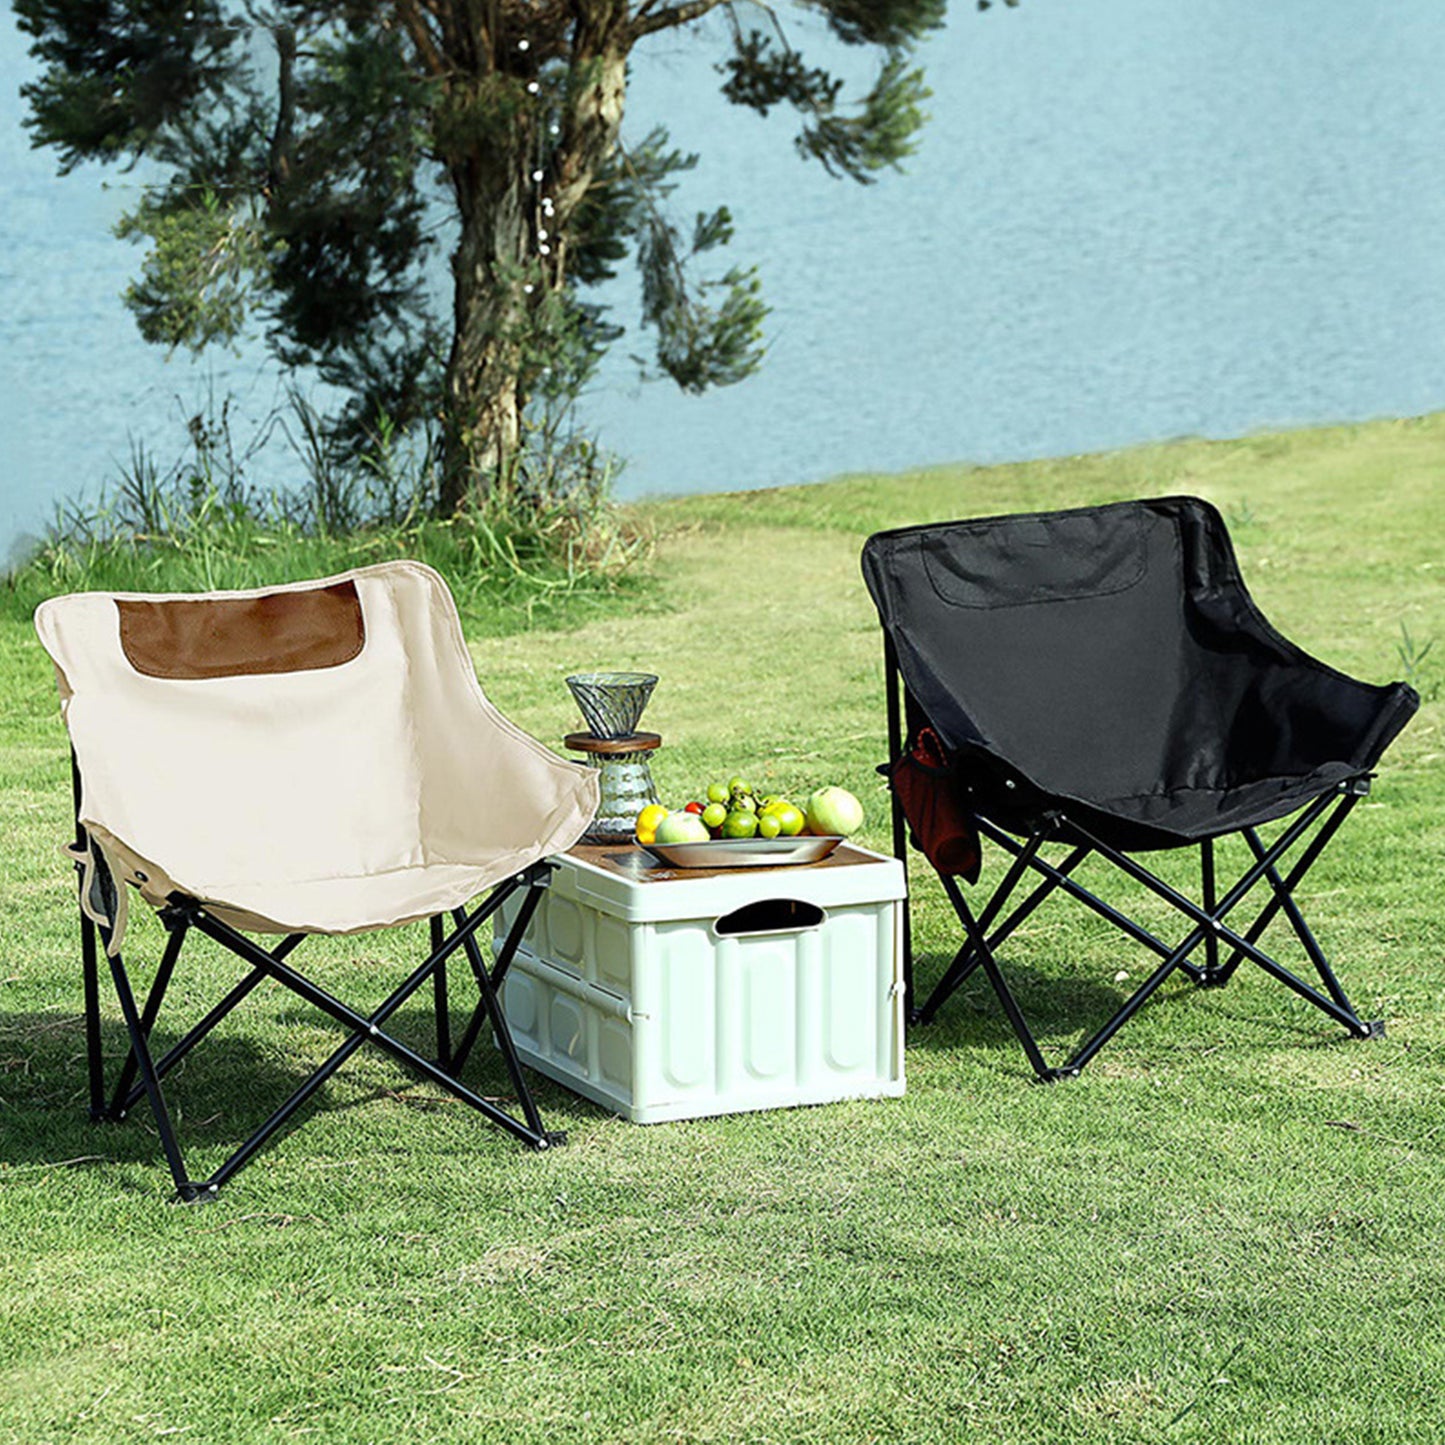 Foldable Camping Chair Oversized Oxford Fabric Moon Chairs Folding Camping Chairs